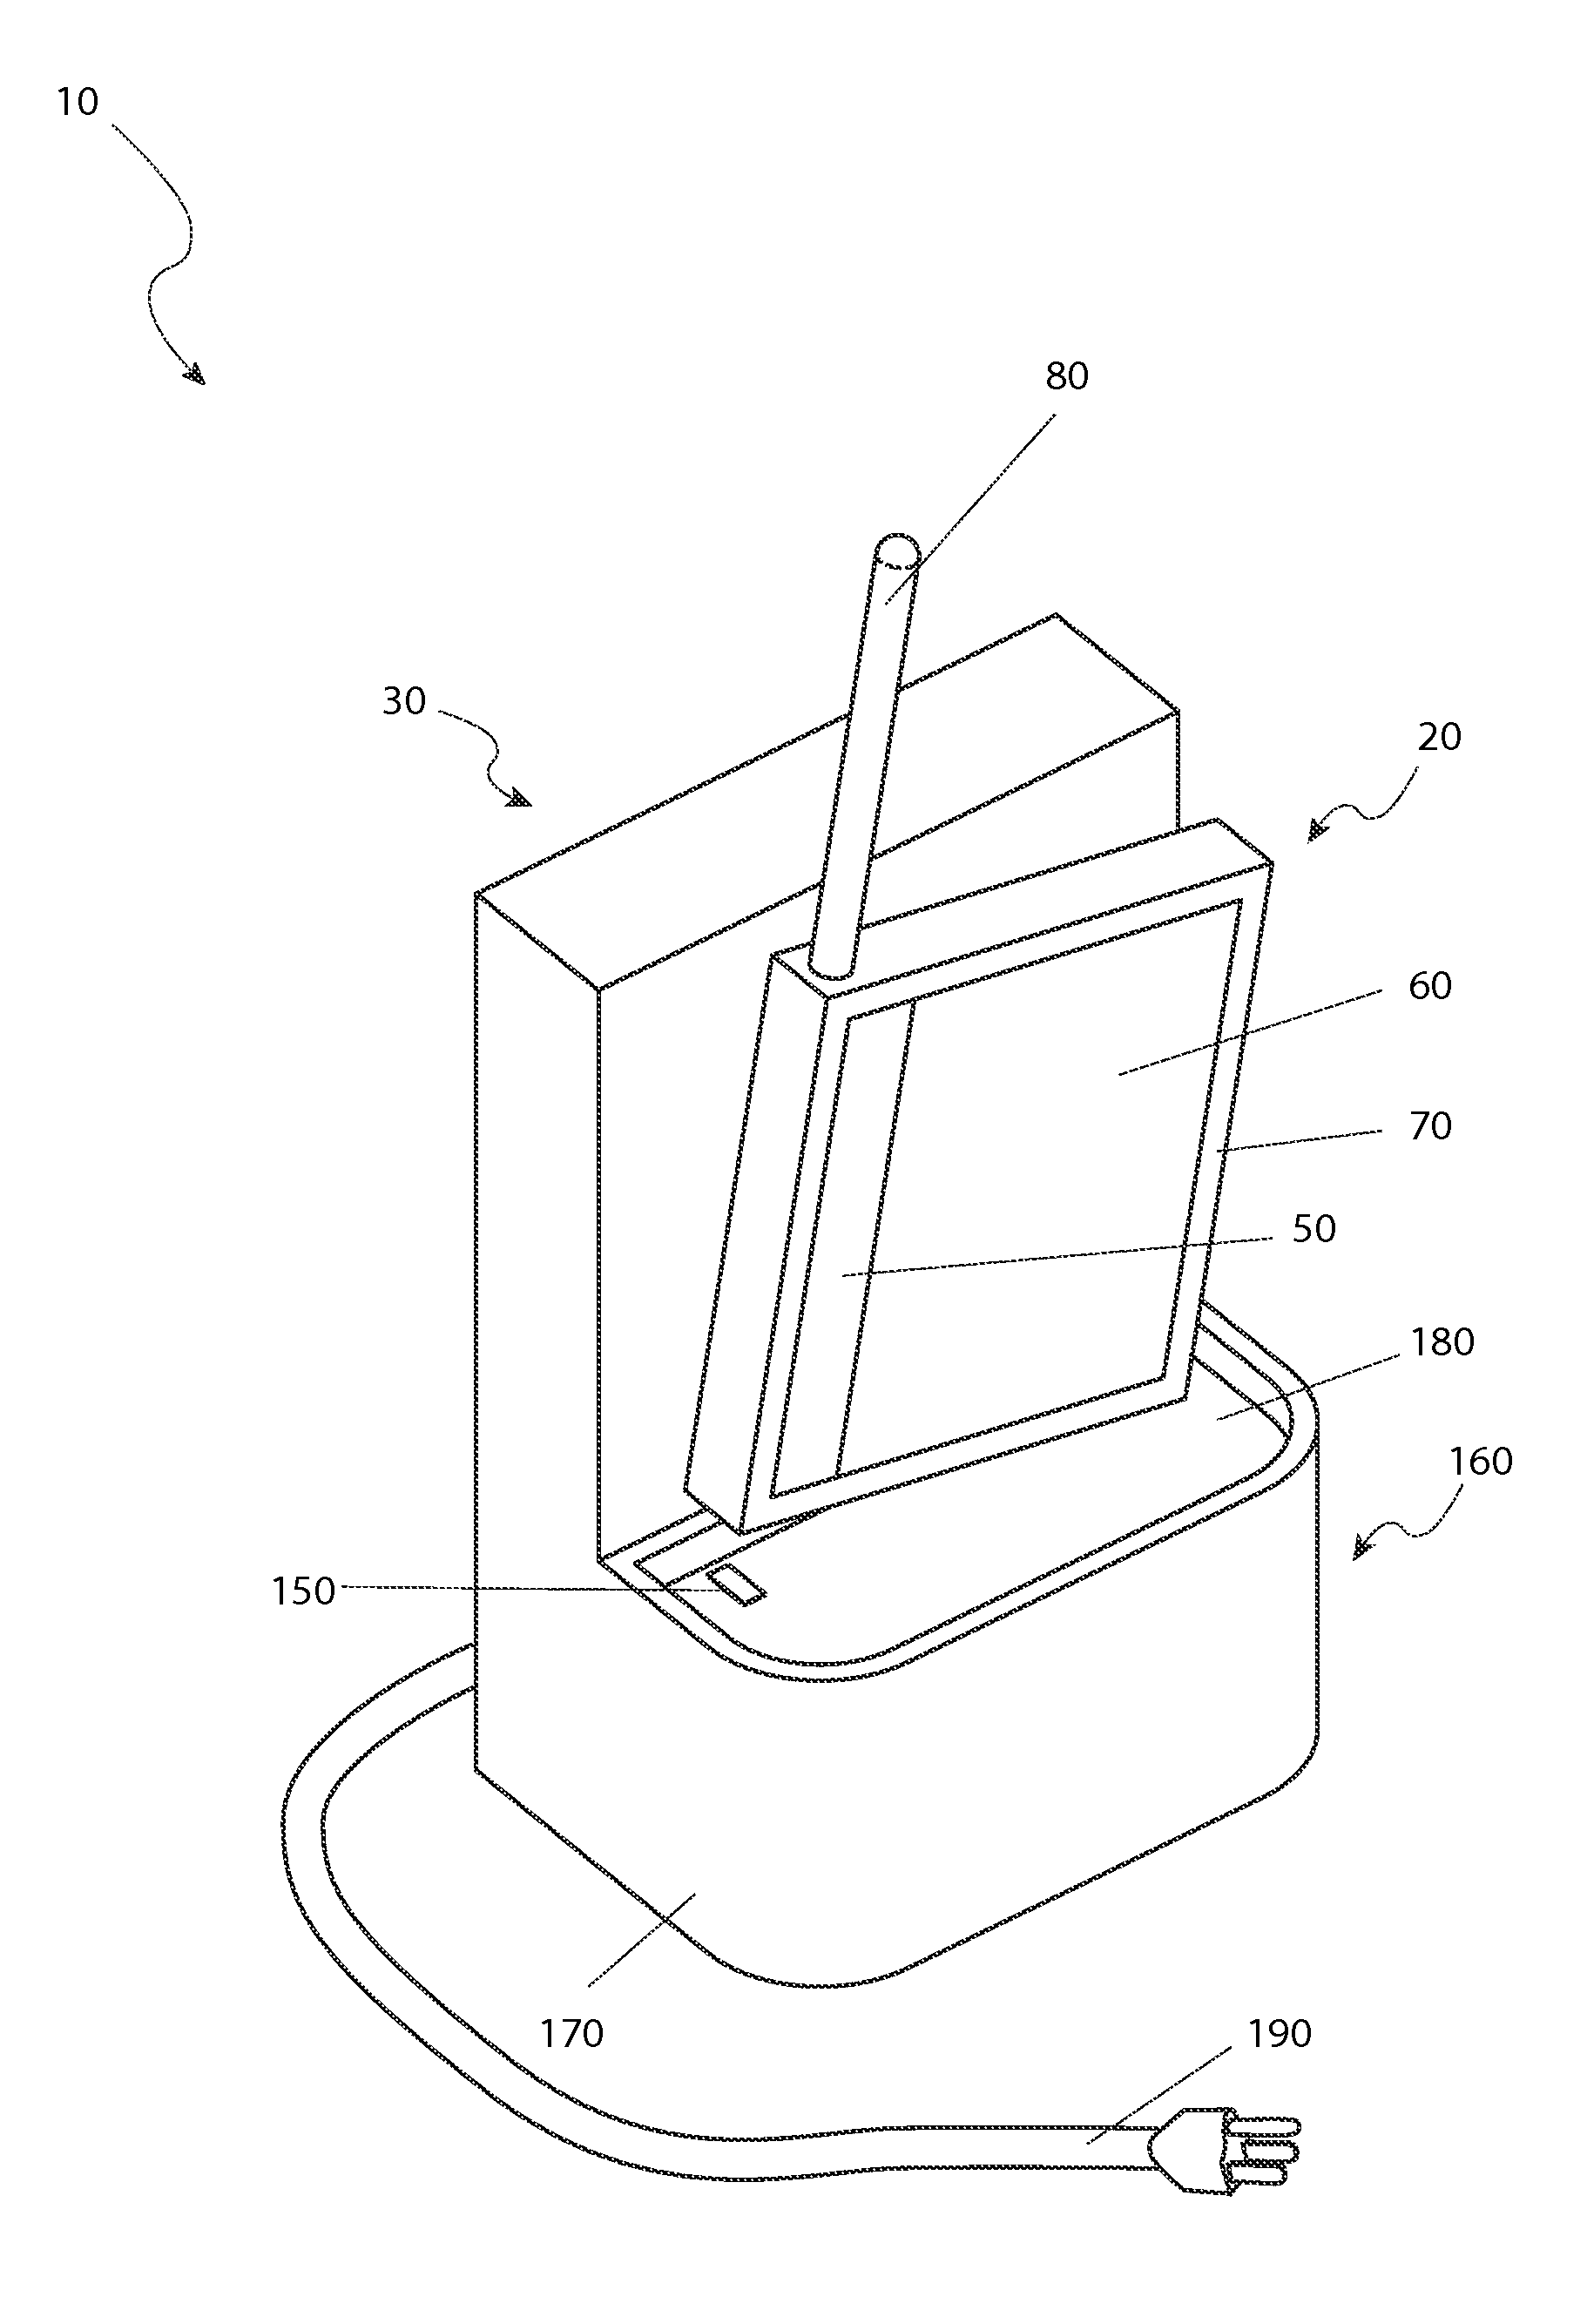 Identifier device for implantable defibrillators and pacemakers